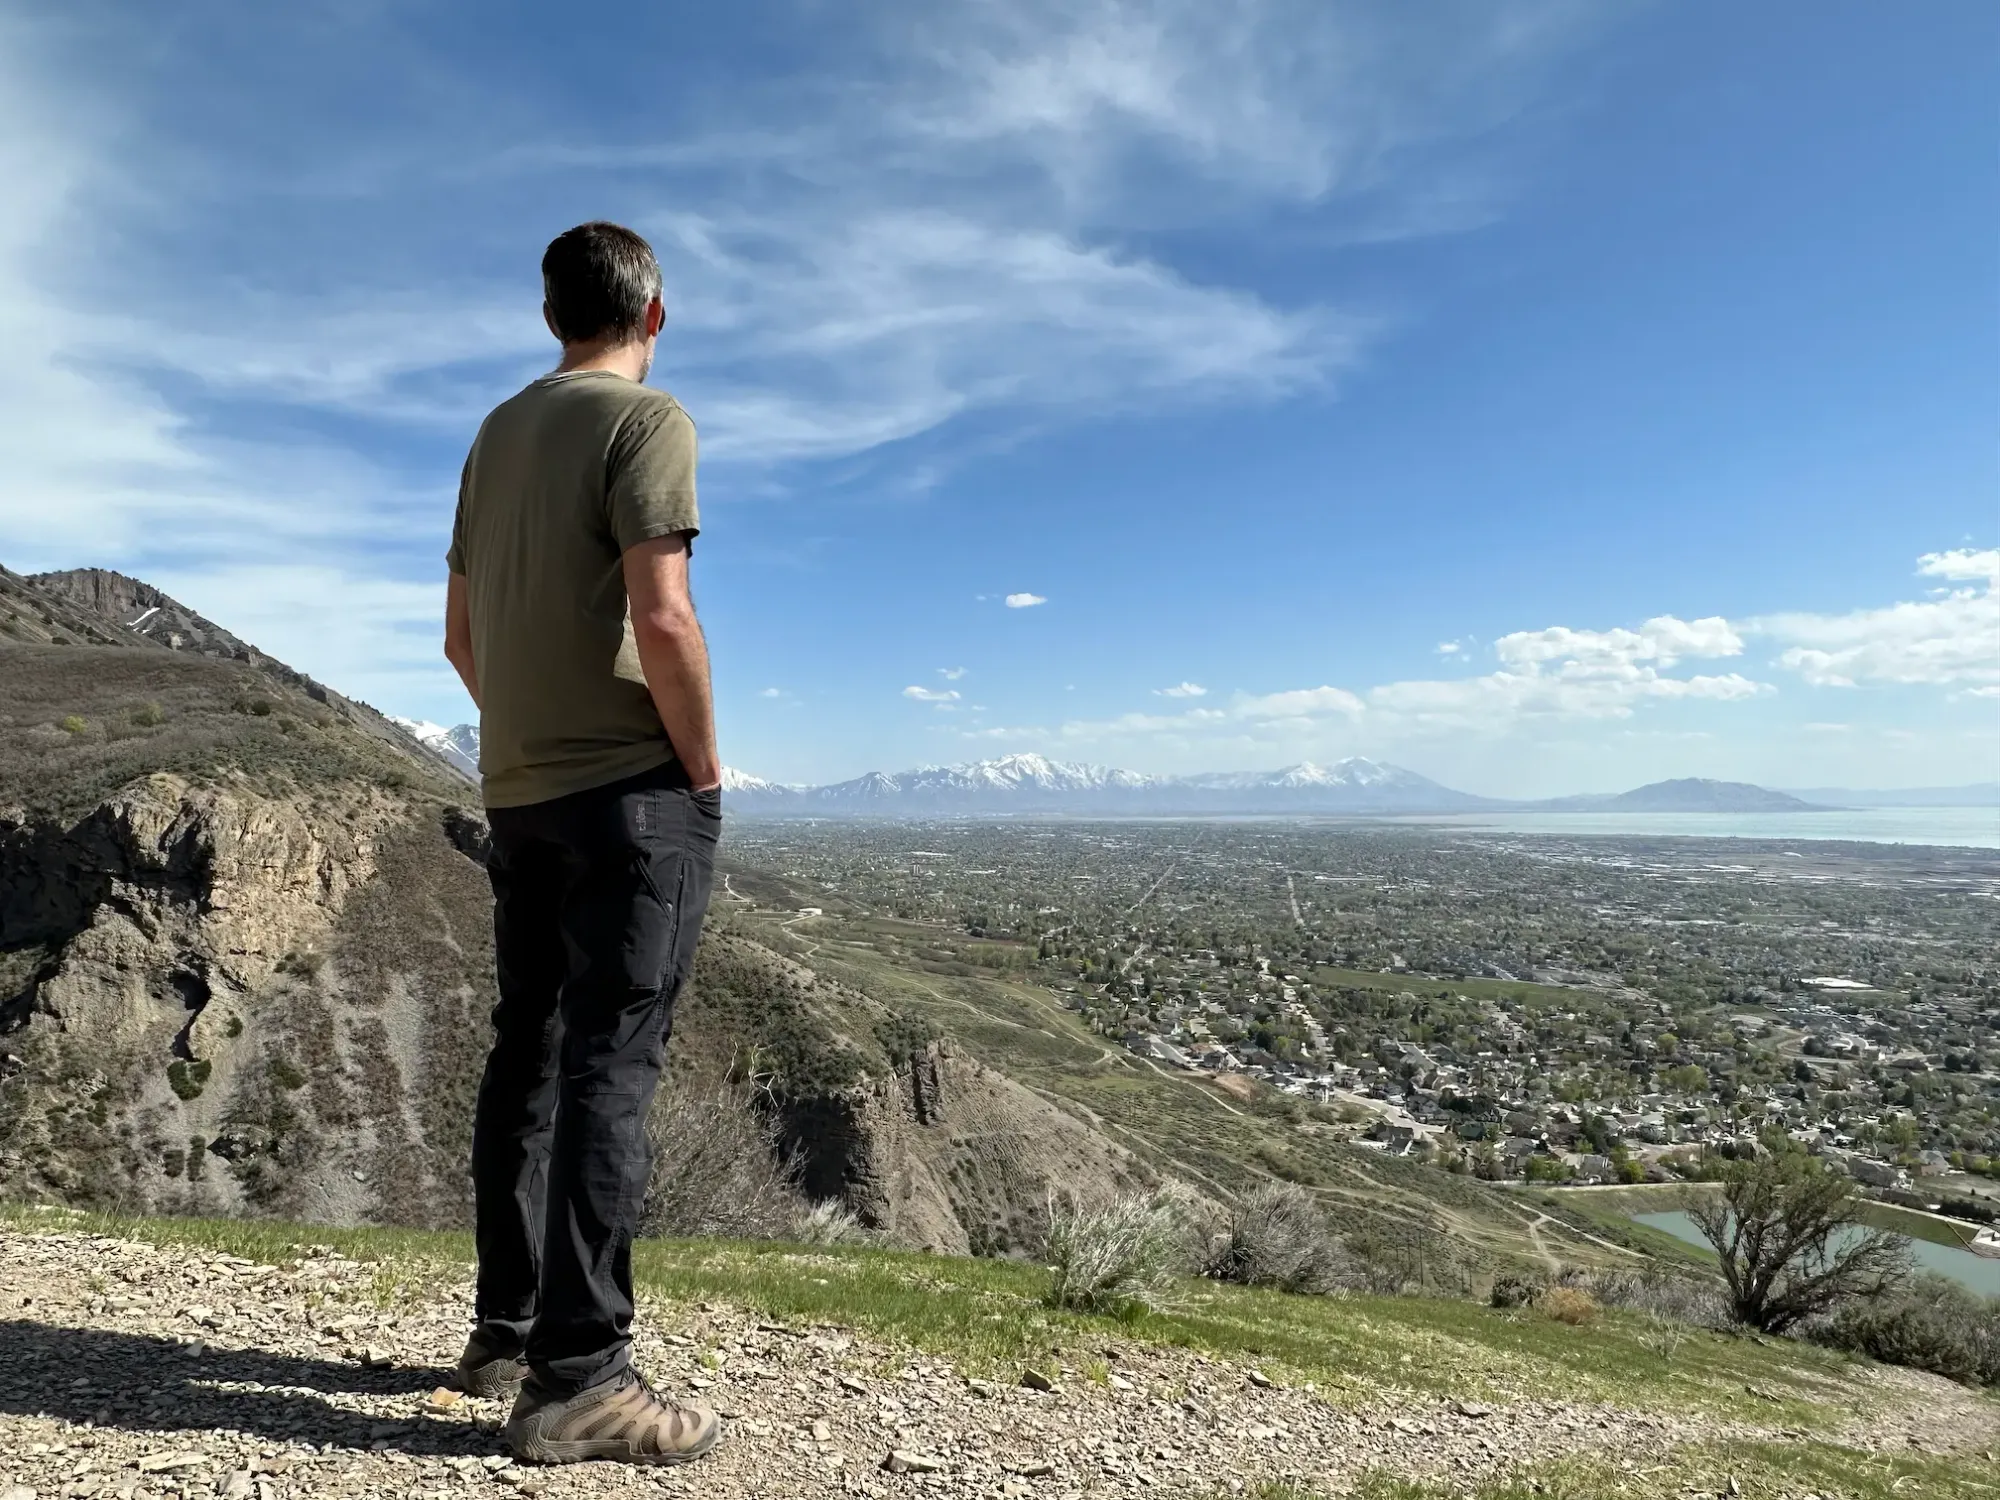 Keith is enjoying the amazing views of Utah Valley from the Grove Creek hiking trail